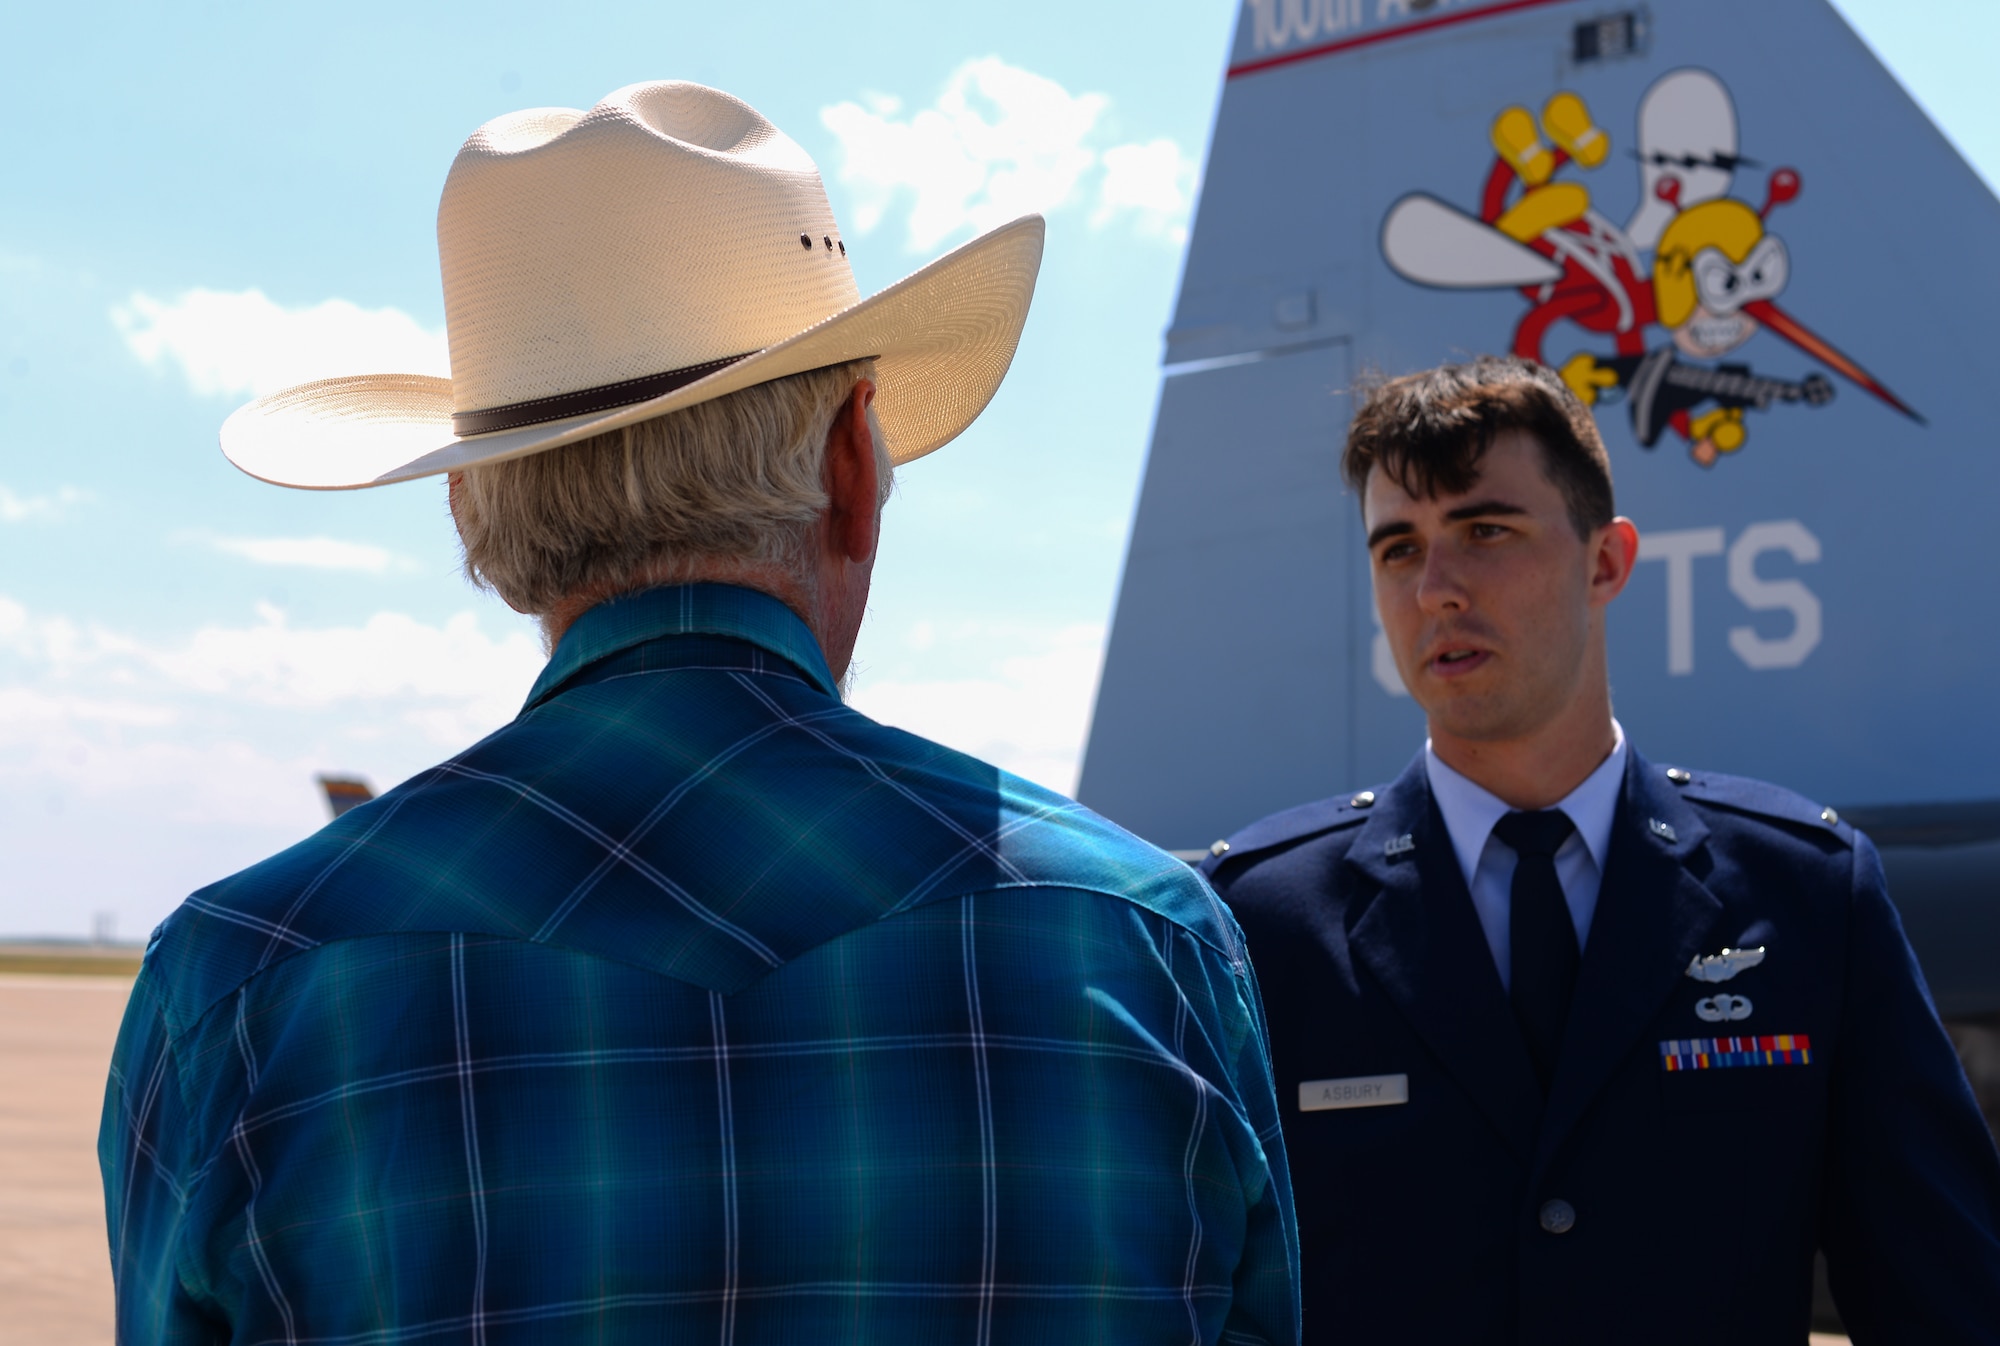 Second Lieutenant Colin Asbury (right), 47th Flying Training Wing pilot graduate, shows Lt. Col. (ret.) Thomas Byrd, former pilot, around the T-38C Talon after graduation at Laughlin Air Force Base, Texas, May 18, 2018. Byrd graduated from pilot training at Laughlin as well, and was brought back to present Asbury a pair of wings that have been handed down for three generations now. (U.S. Air Force photo by Senior Airman Benjamin N. Valmoja)